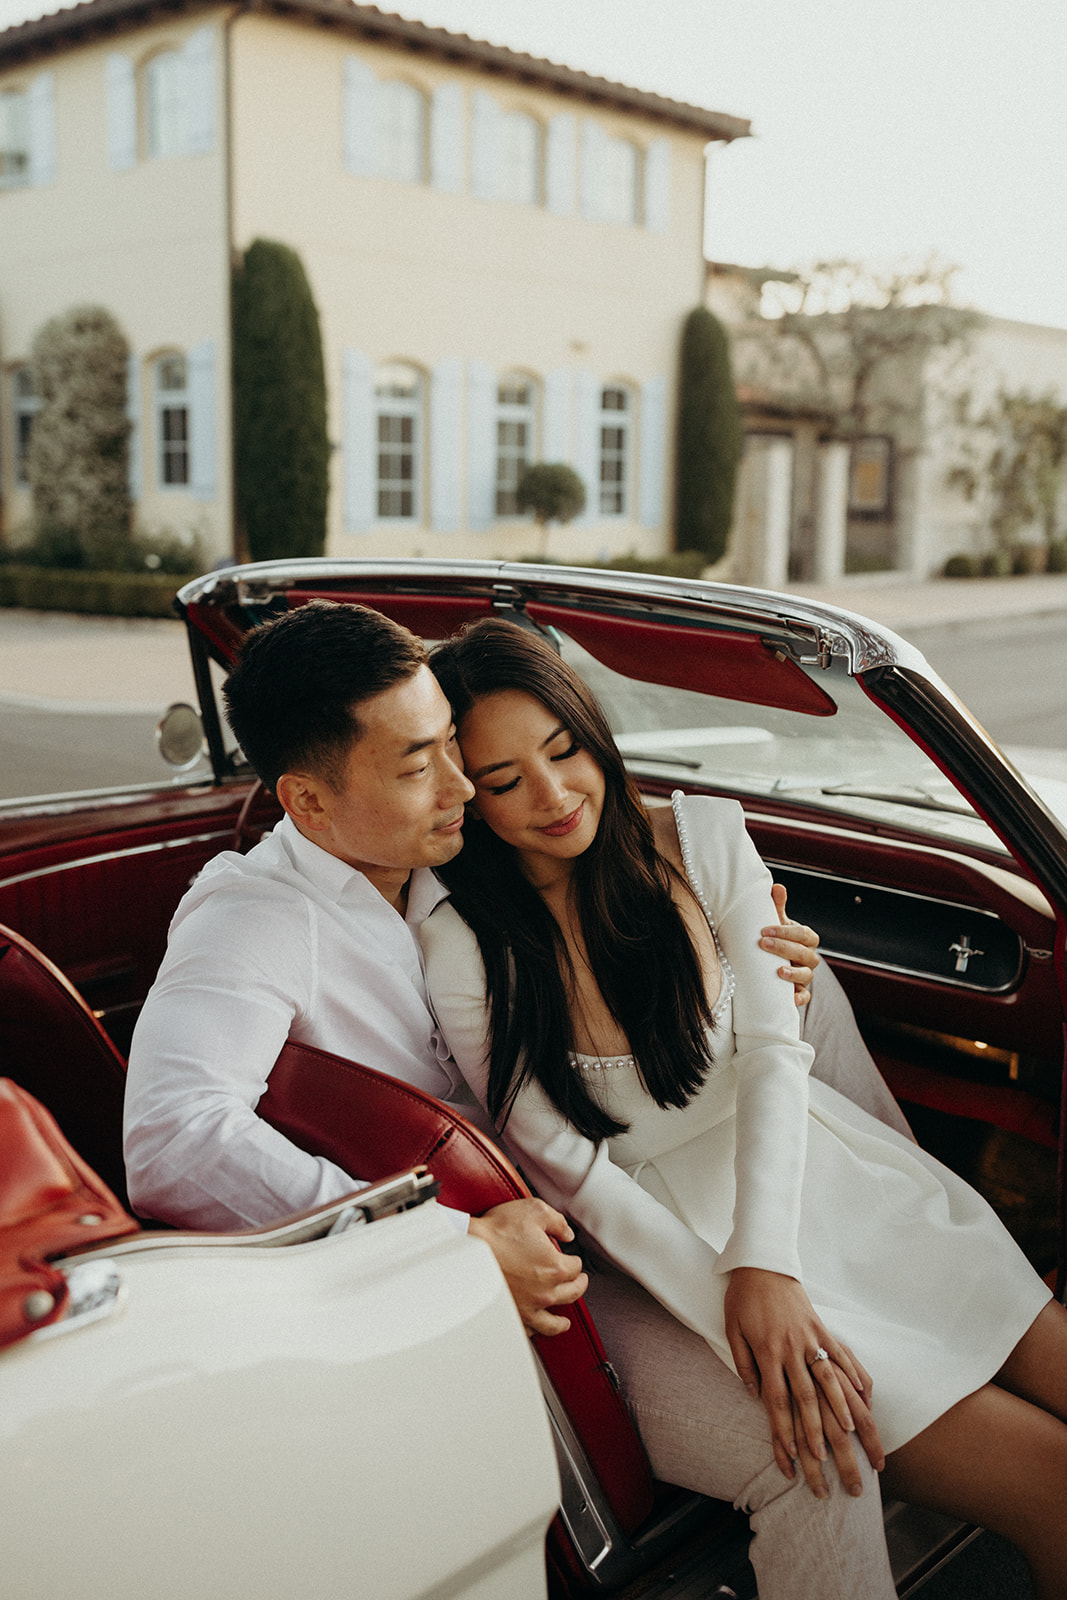 couple snuggling together in the passenger seat of a white vintage mustang car